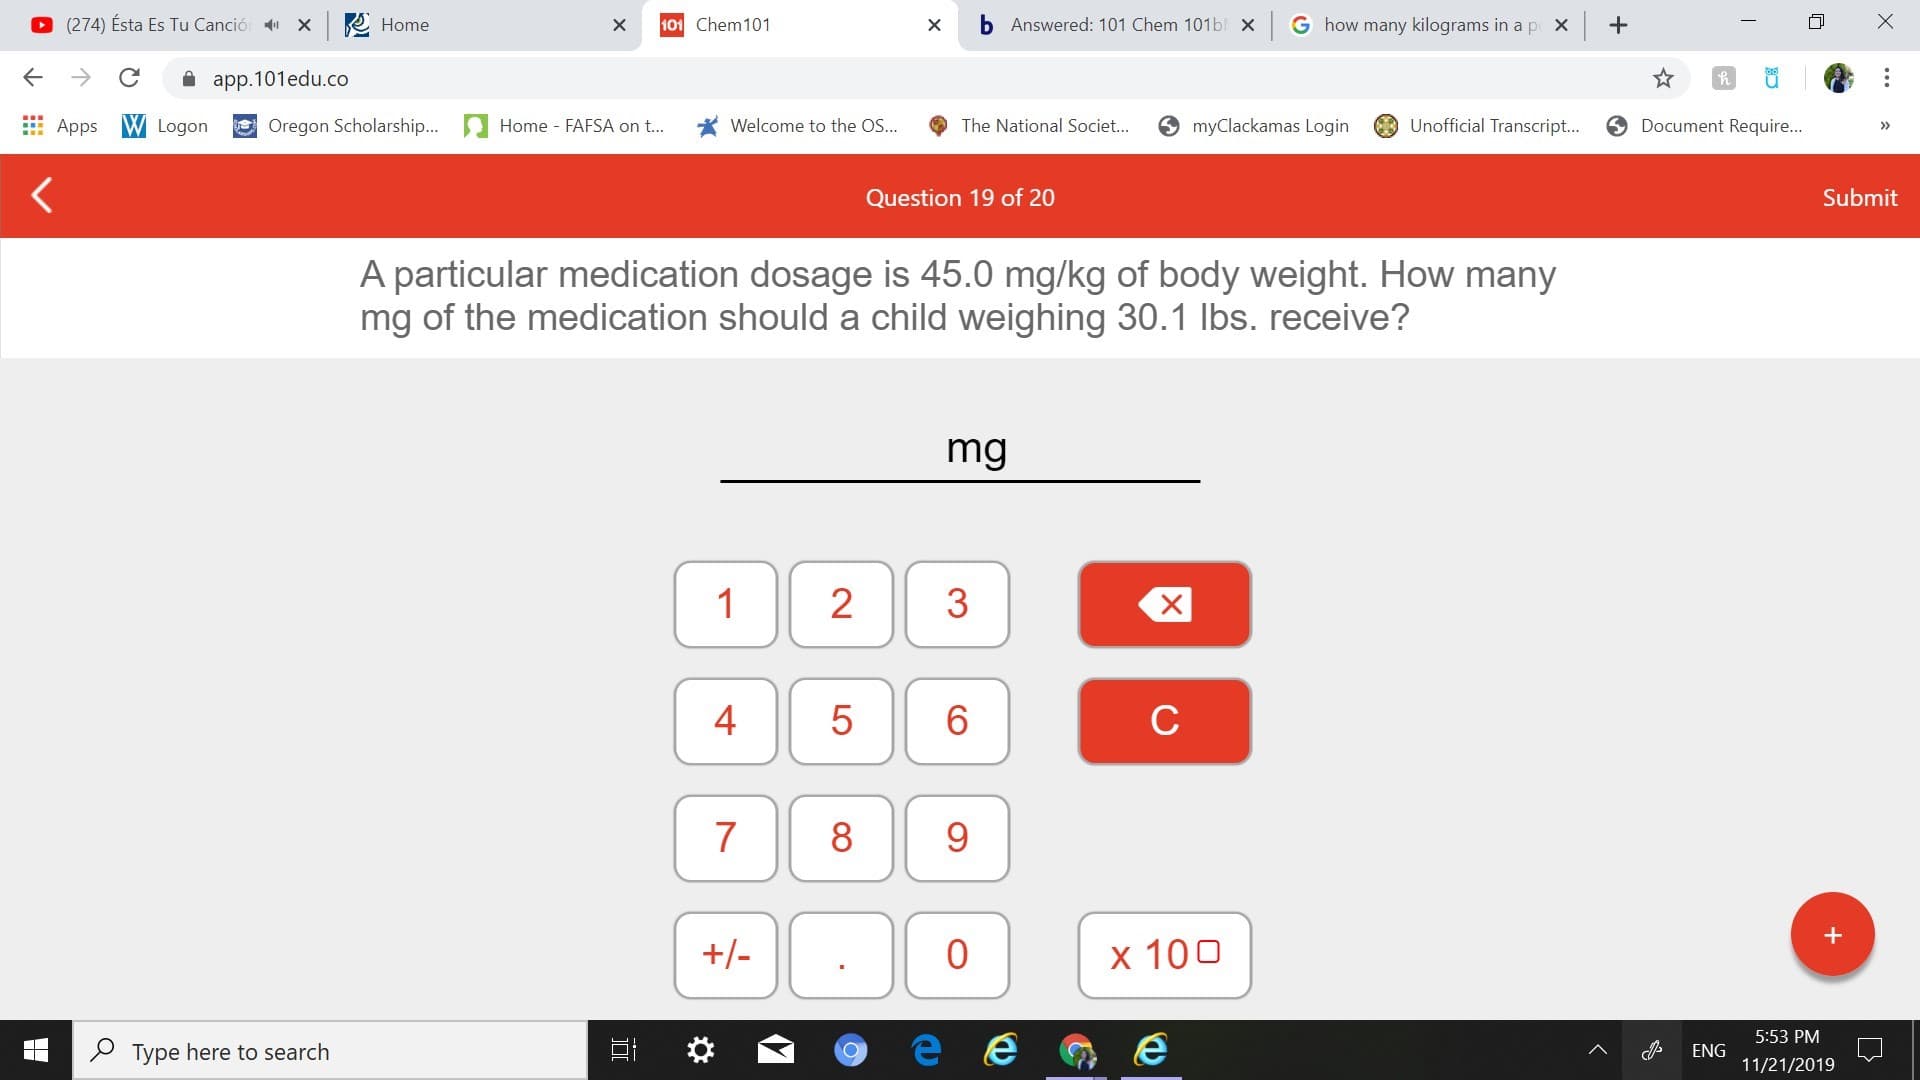 bAnswered: 101 Chem 101 b X G how many kilograms in a p x
(274) Ésta Es Tu Canció
101 Chem 101
X
Home
X
app.101edu.co
Oregon Scholarship....
Unofficial Transcript...
myClackamas Login
Document Require...
Apps WLogon
Welcome to the OS...
Home - FAFSA on t...
The National Societ...
>
Submit
Question 19 of 20
A particular medication dosage is 45.0 mg/kg of body weight. How many
mg of the medication should a child weighing 30.1 lbs. receive?
mg
1
2
3
X
5
6
C
7
8
+-
0
x 100
5:53 PM
Type here to search
ENG
11/21/2019
+
LO
4t
